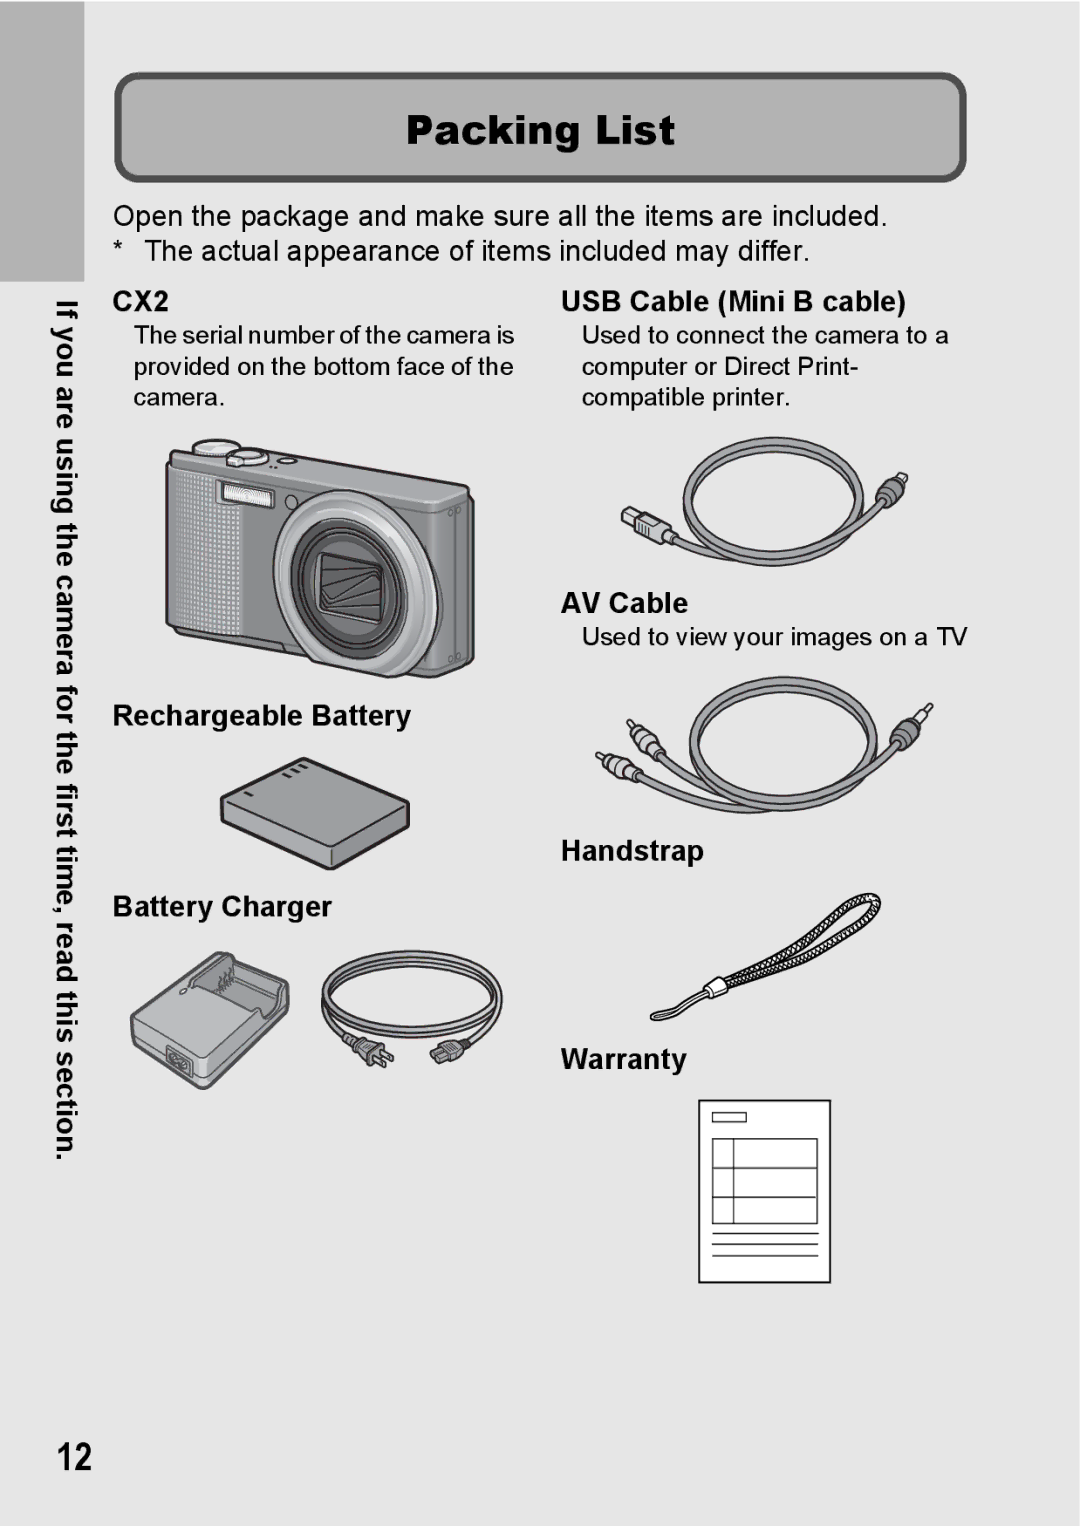 Samsung CX2 manual Packing List, Rechargeable Battery Battery Charger USB Cable Mini B cable, AV Cable 